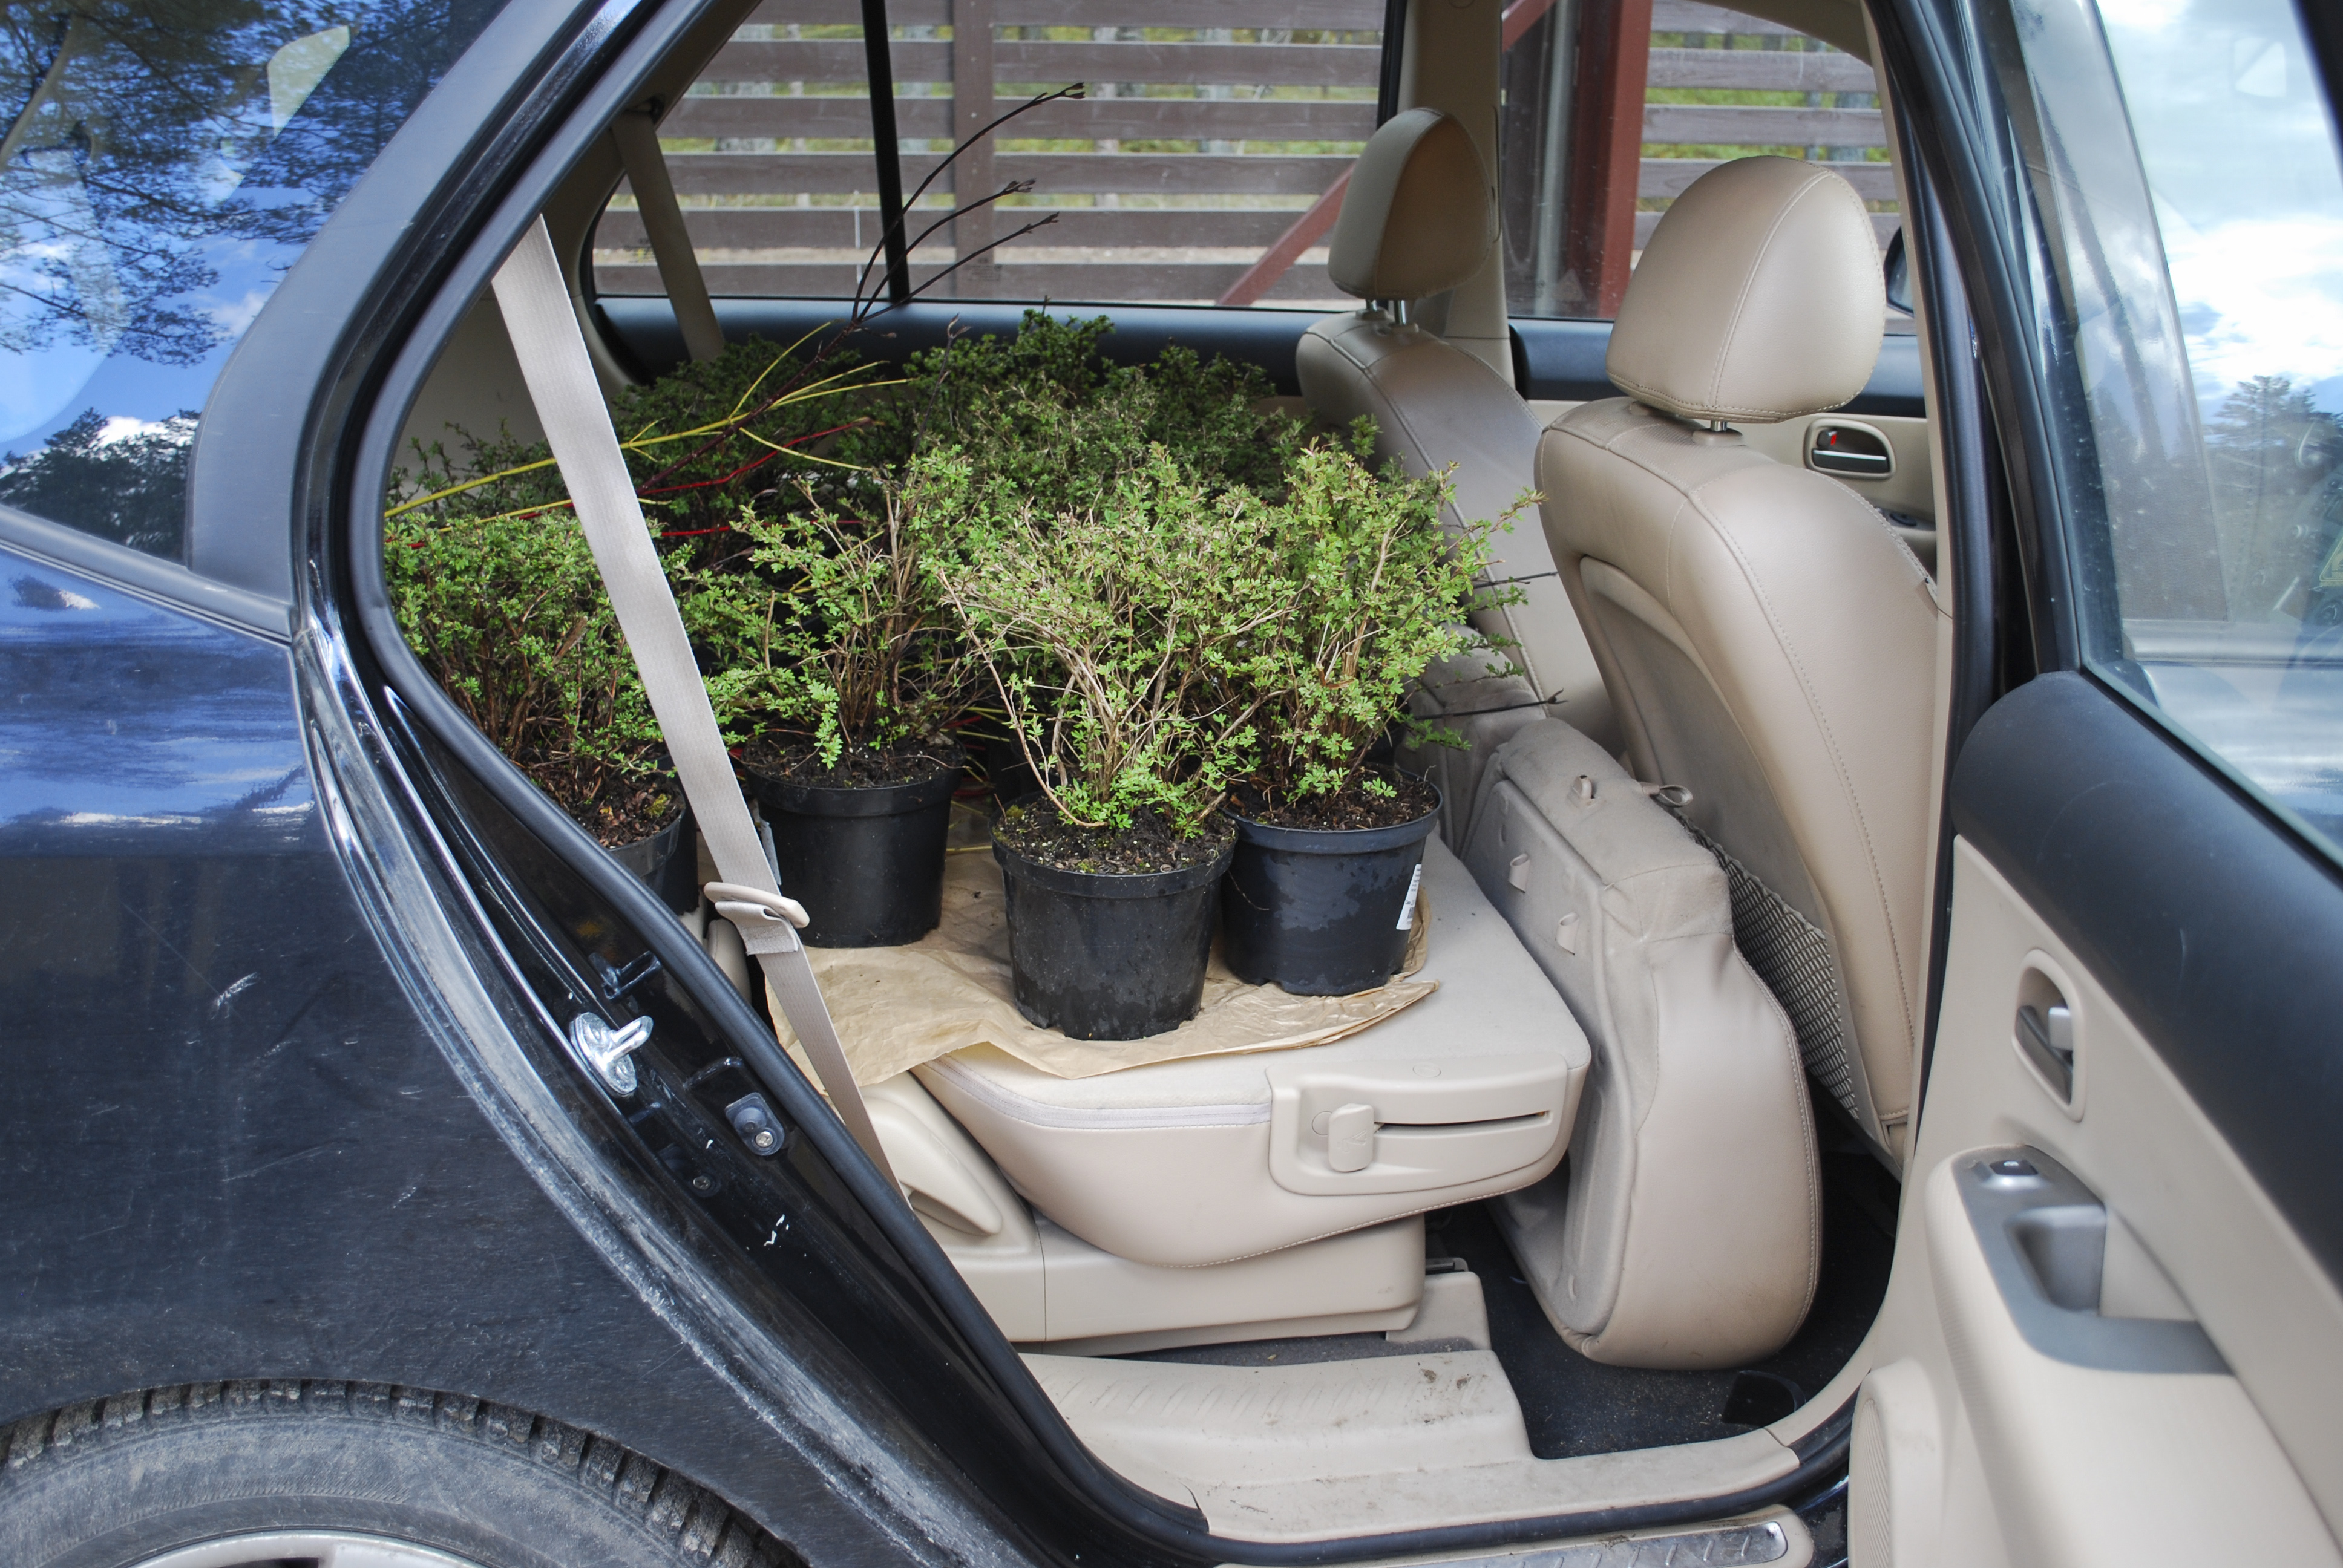 Don't leave your plants to wilt in the car (Thinkstock/PA)